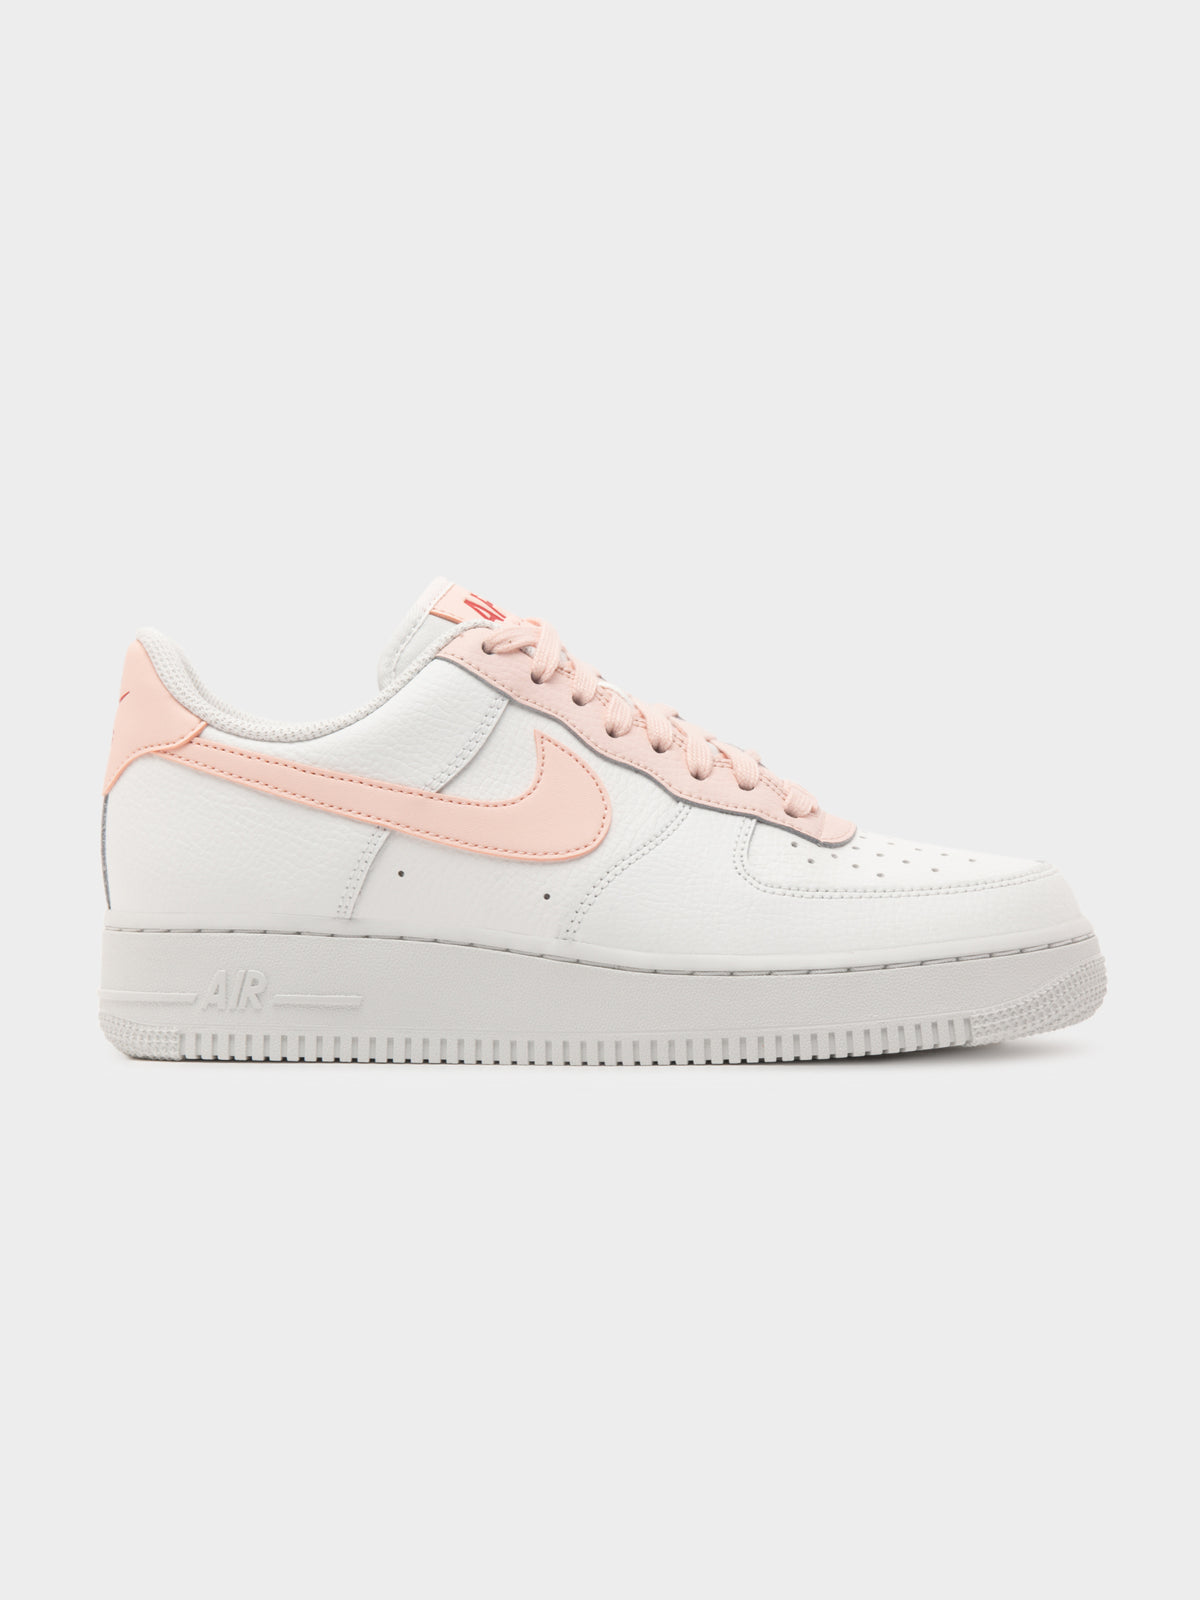 Womens Nike Air Force 1 07 in Summit White &amp; Pale Coral